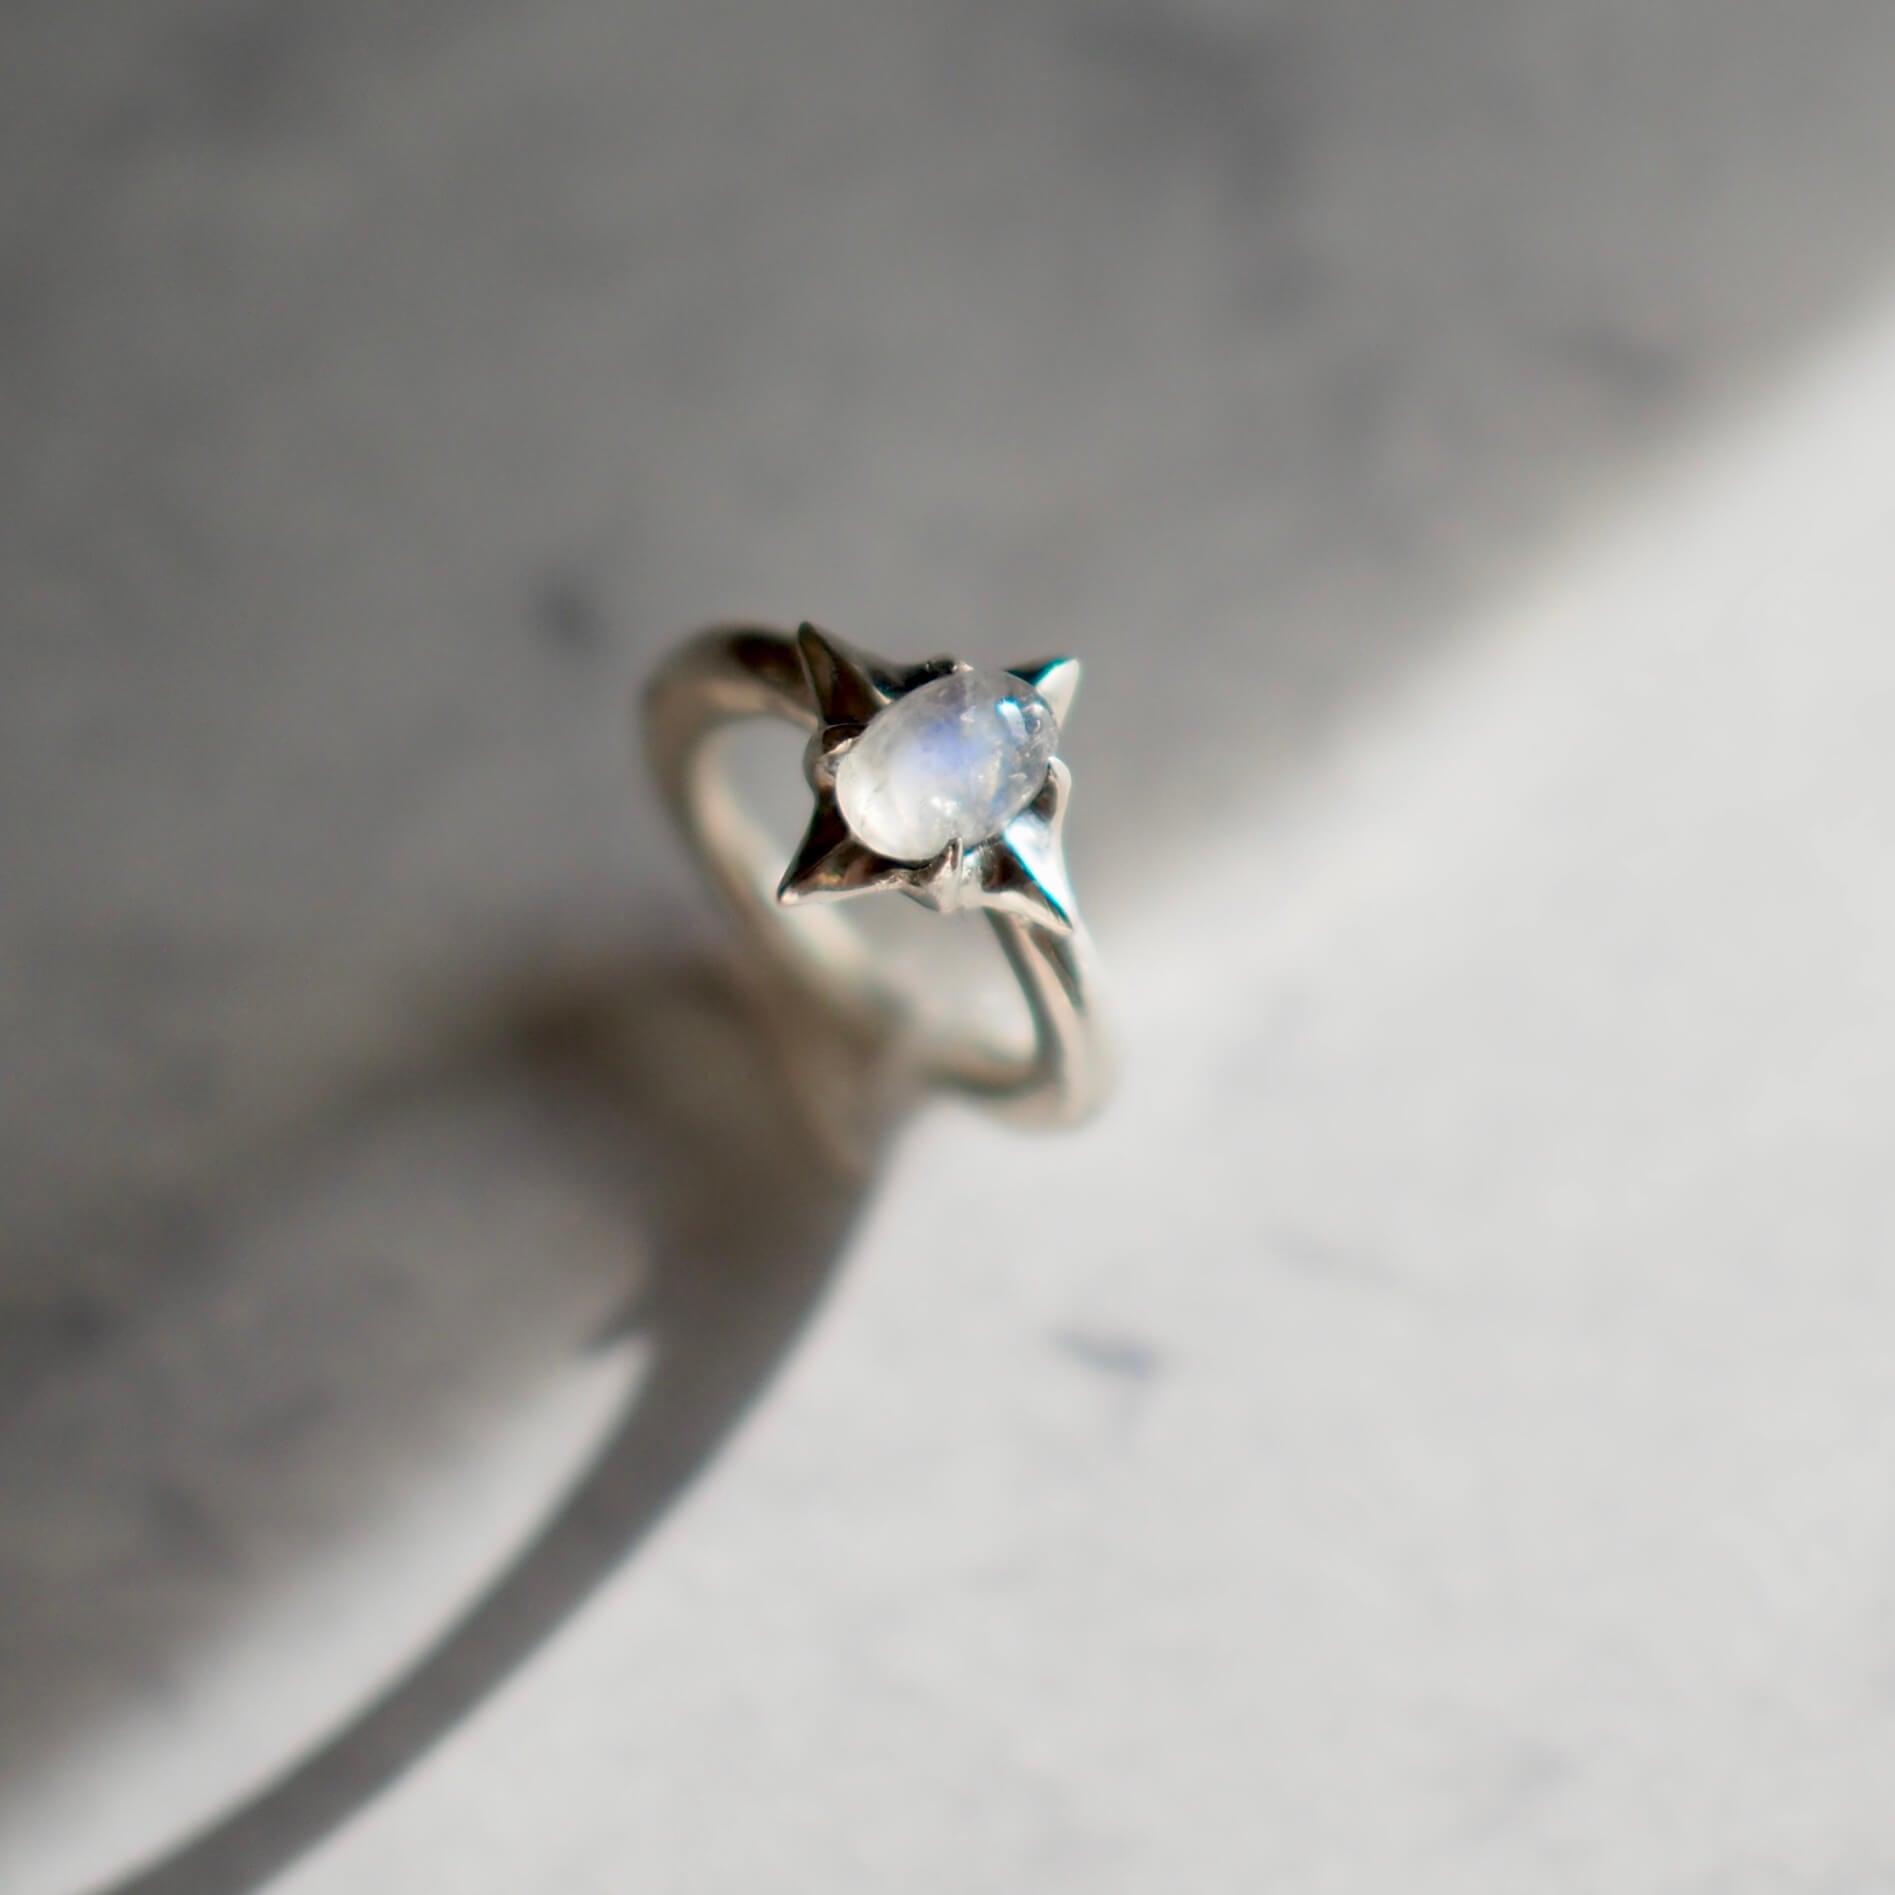 Ethically sourced moonstone star ring set in sterling silver from Iron Oxide Designs.